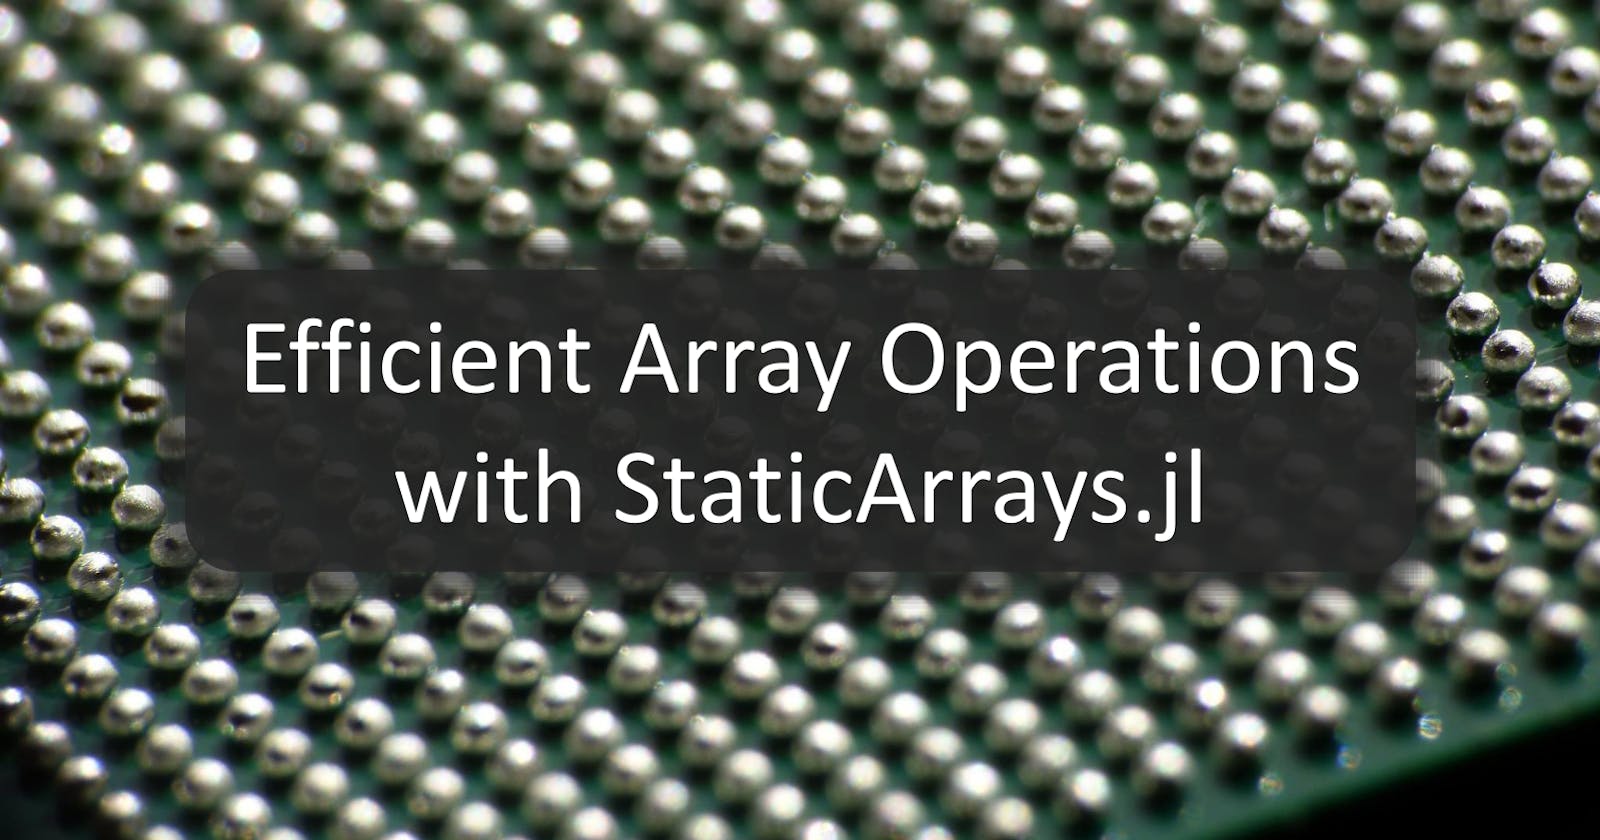 Mastering Efficient Array Operations with StaticArrays.jl in Julia